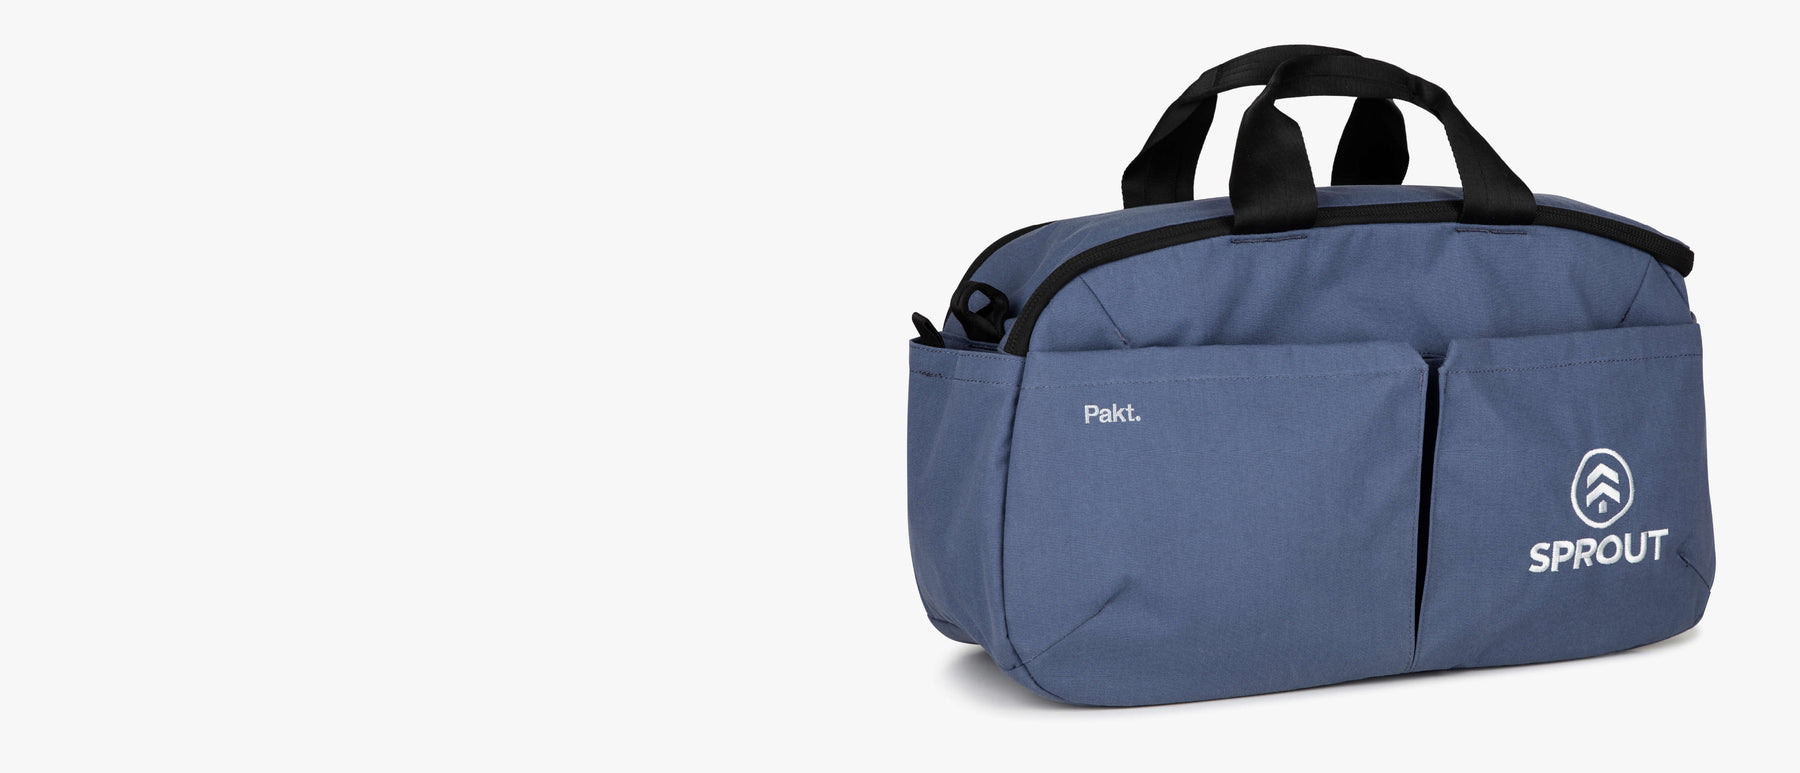 Corporate branded embroidery on the Pakt 25L Duffel